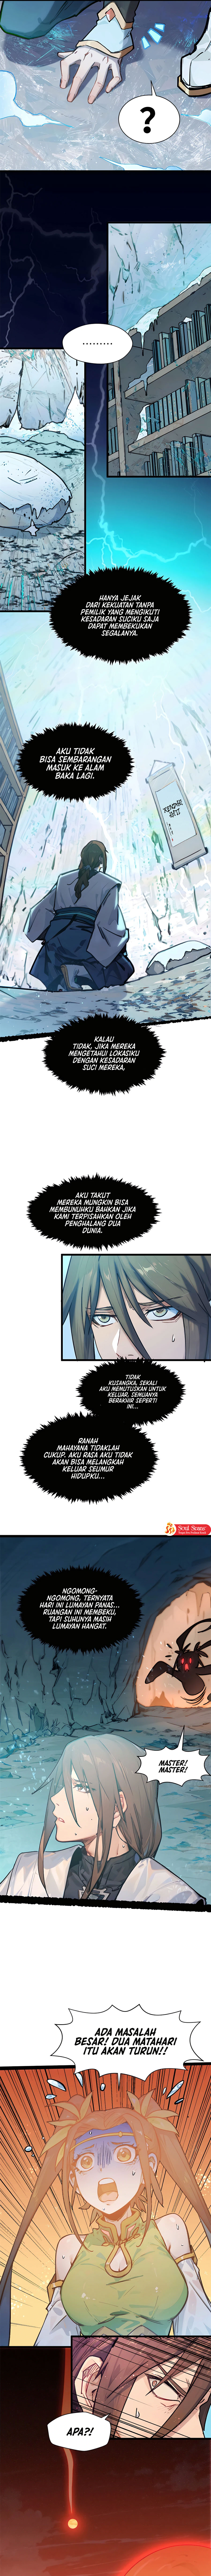 Dilarang COPAS - situs resmi www.mangacanblog.com - Komik top tier providence secretly cultivate for a thousand years 148 - chapter 148 149 Indonesia top tier providence secretly cultivate for a thousand years 148 - chapter 148 Terbaru 13|Baca Manga Komik Indonesia|Mangacan